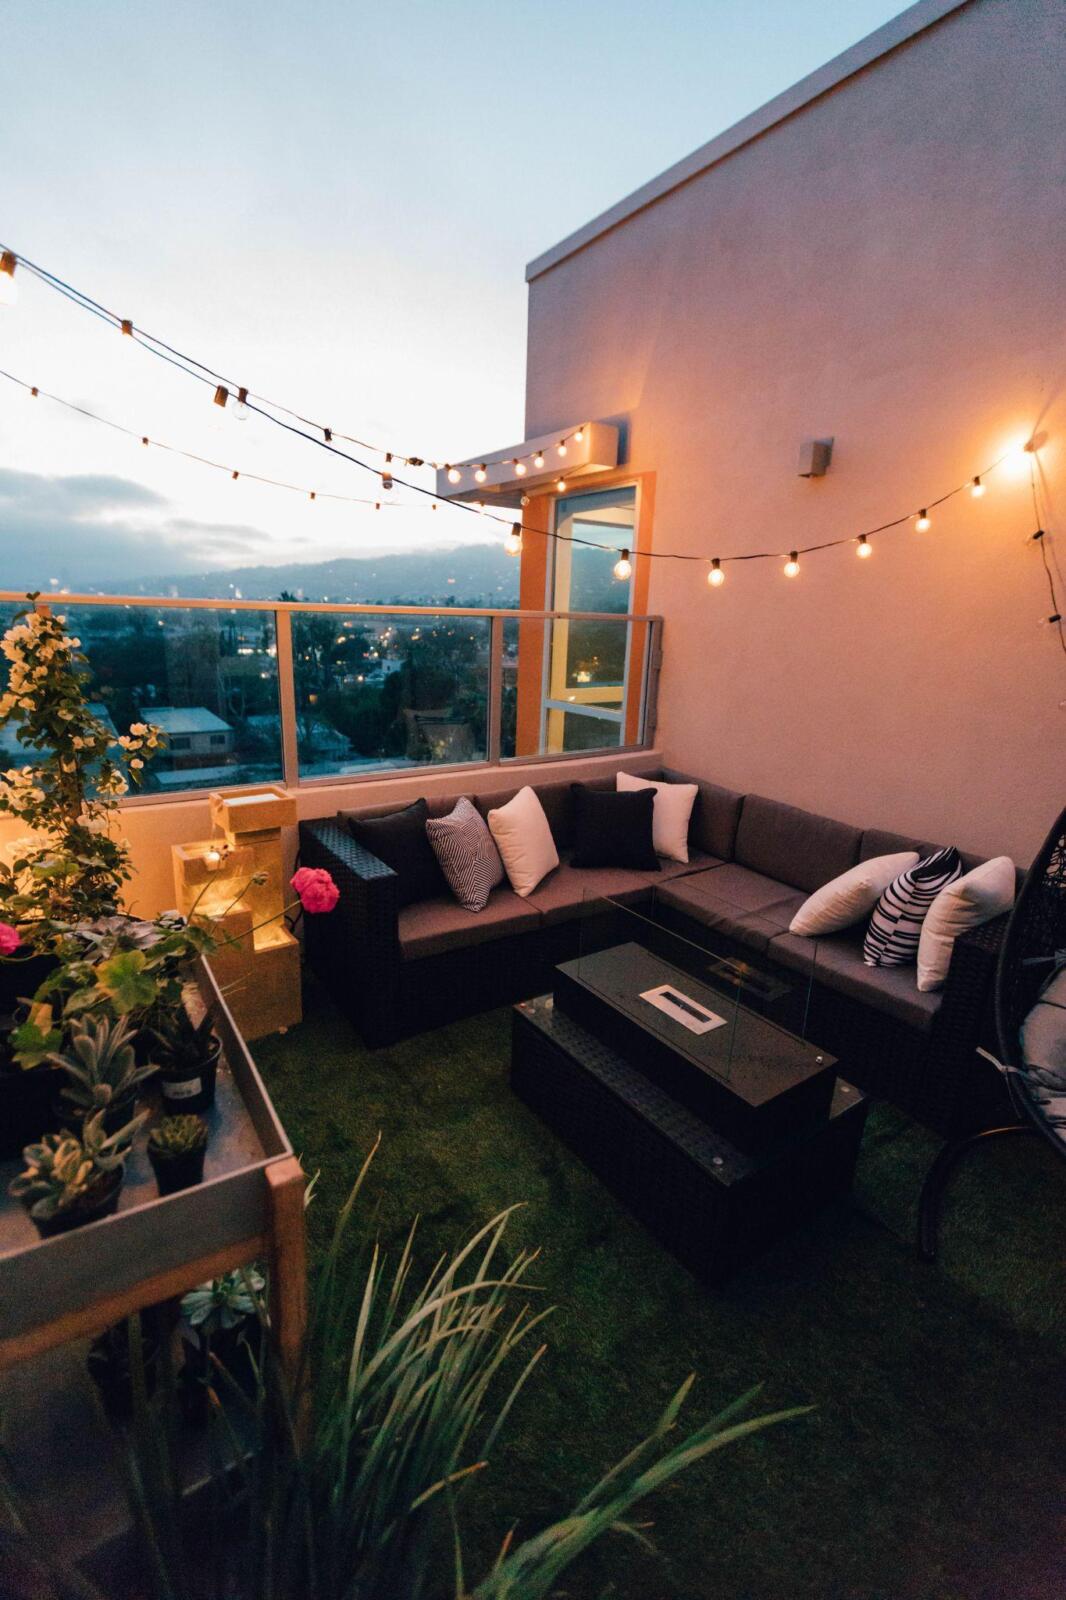 A rooftop patio with cozy string lights, providing the best outdoor lighting.